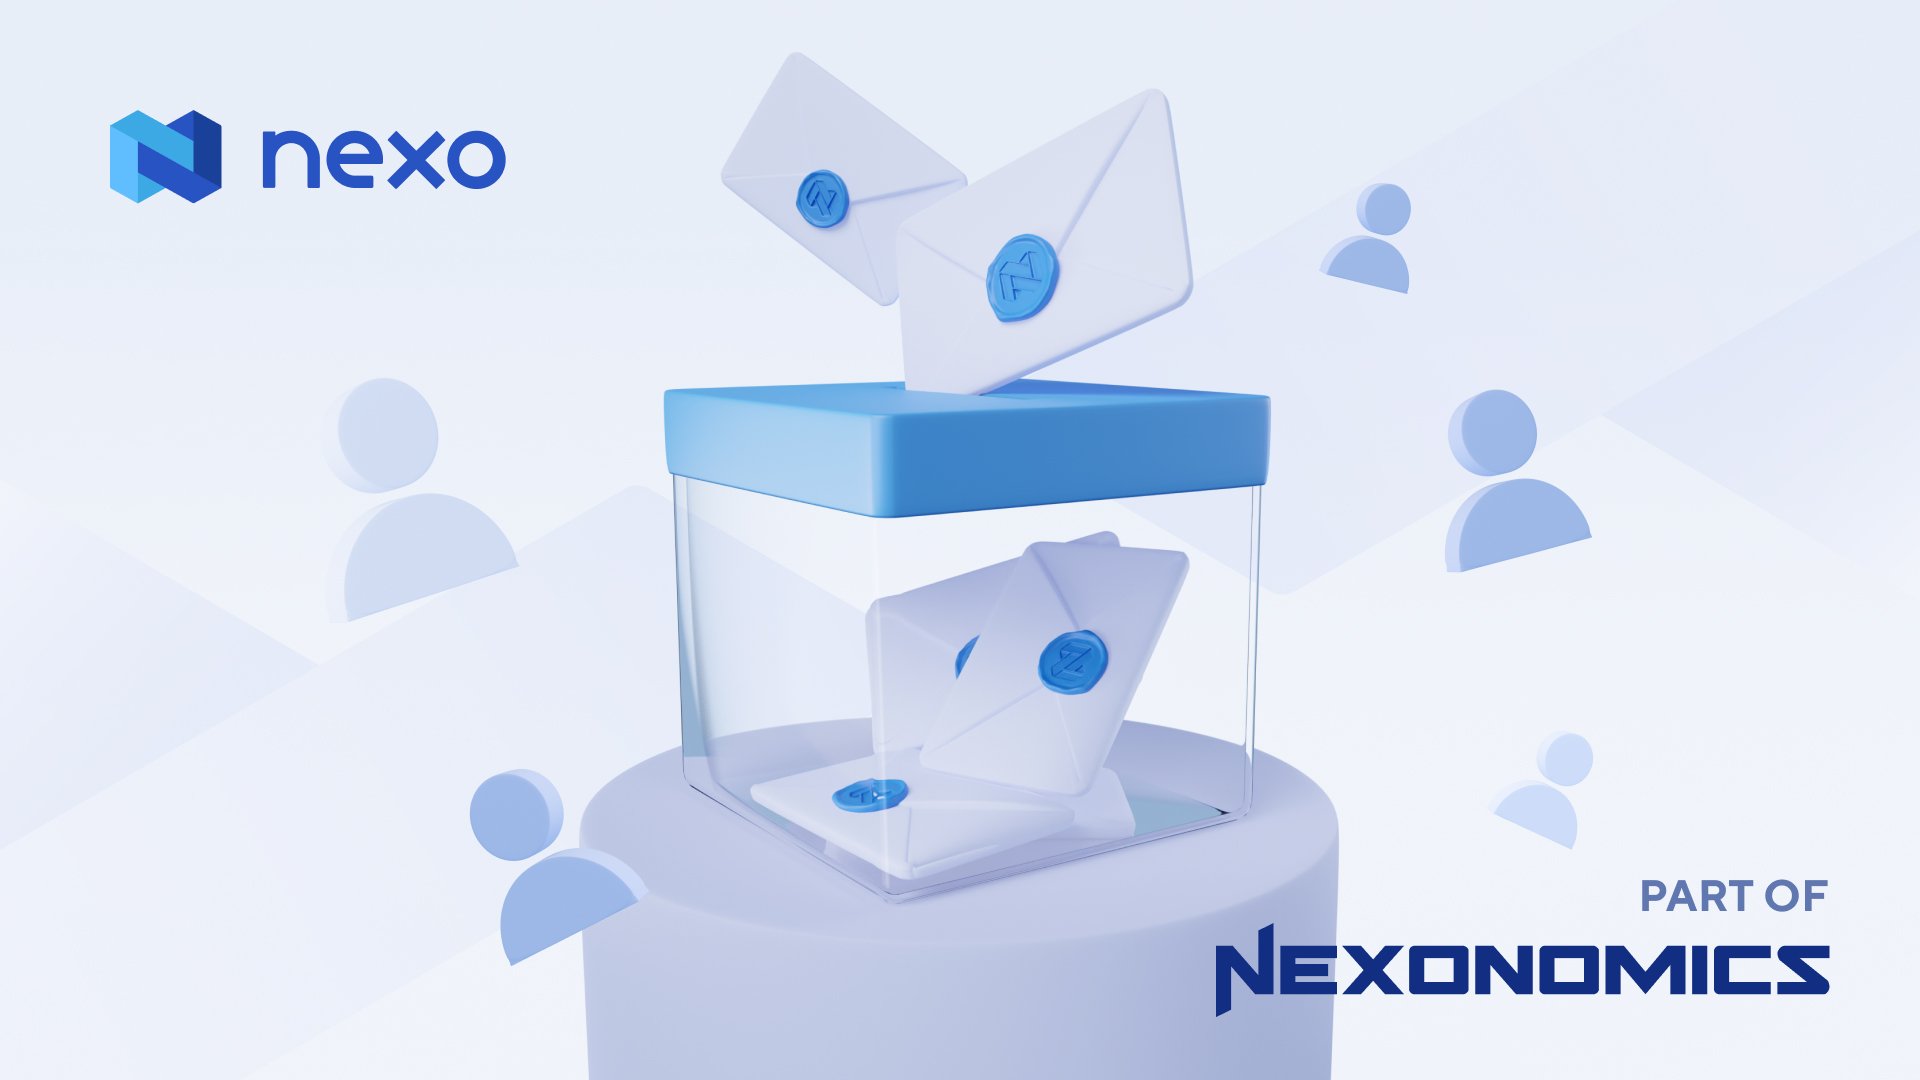 Governance Proposal: Daily Interest on NEXO and a Final Dividend